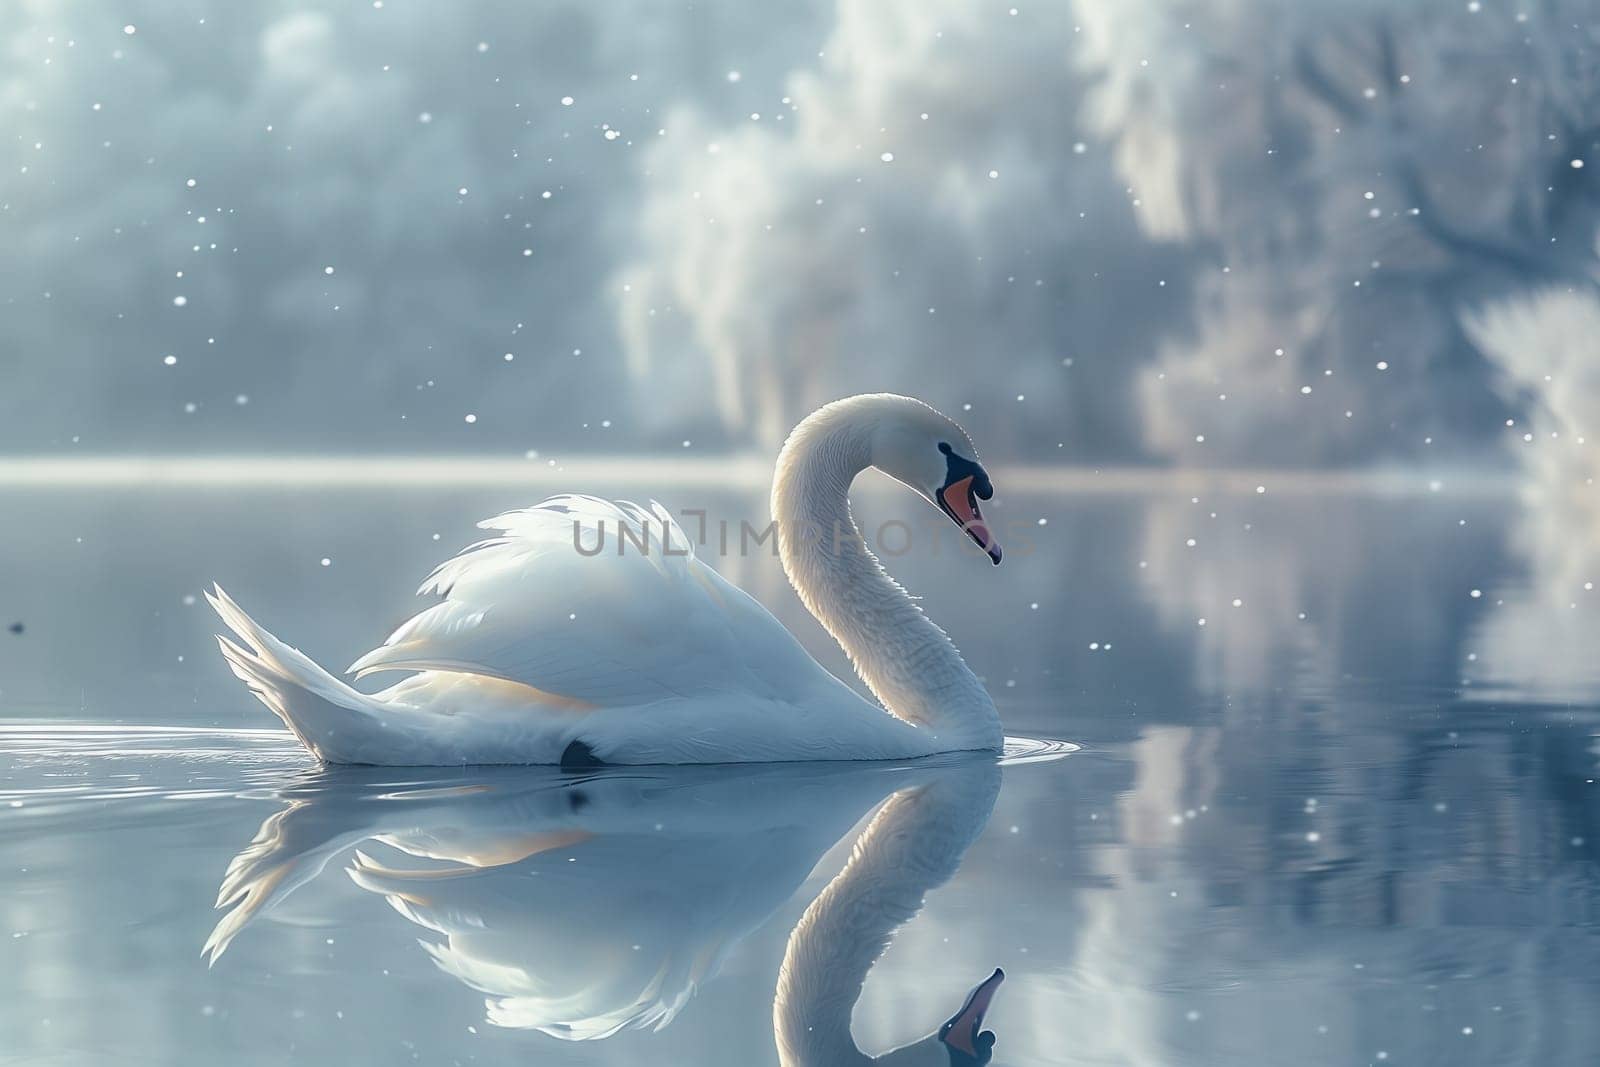 White swan glides on snowy lake, surrounded by waterfowl and fluffy feathers by richwolf